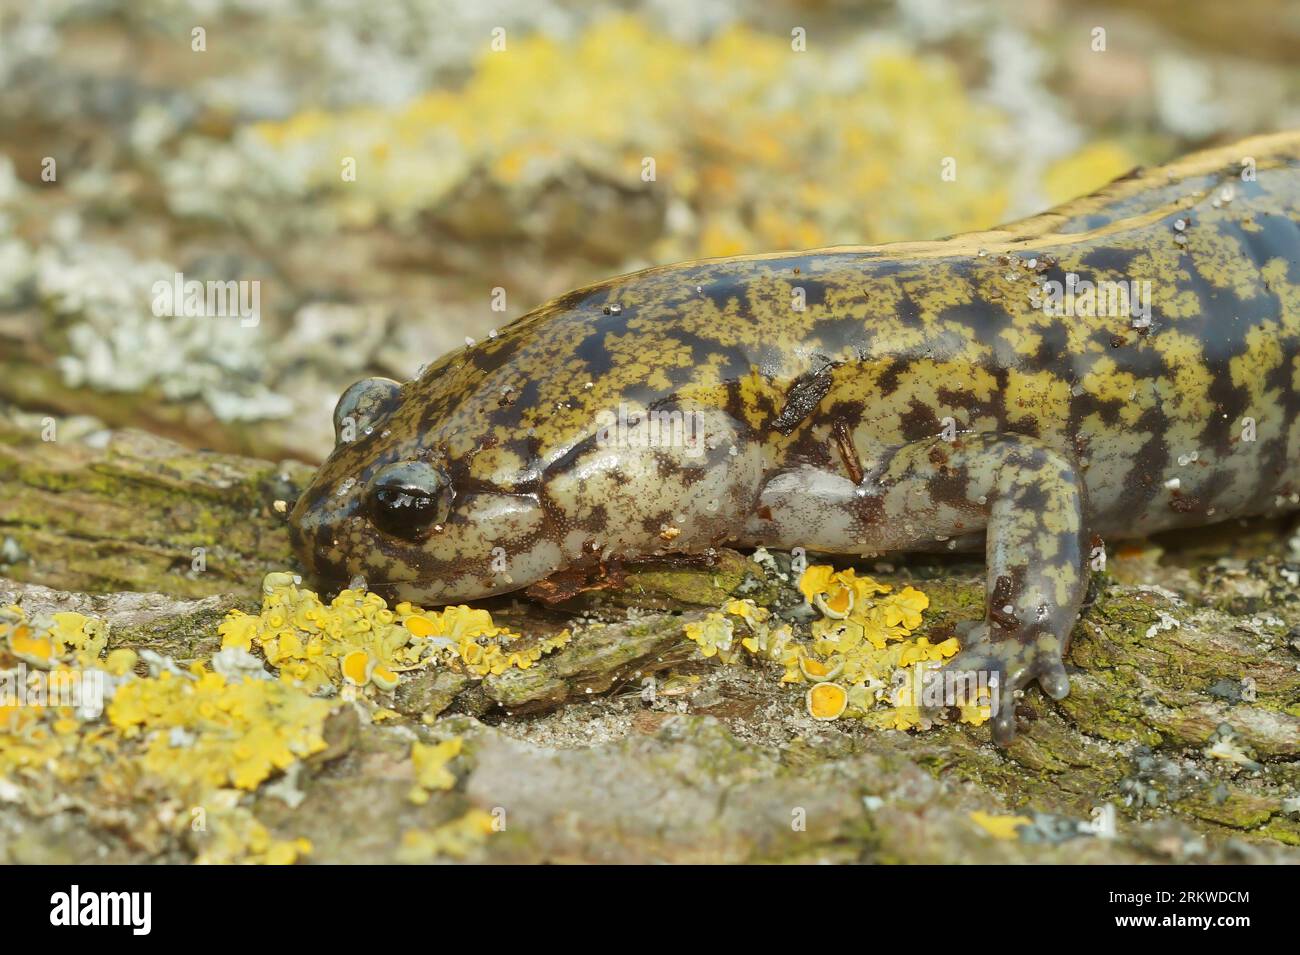 Colorful closeup on a male of the colorful and rare Hondo streamside salamander, Hynobius kimurae, sitting on a piece of wood Stock Photo